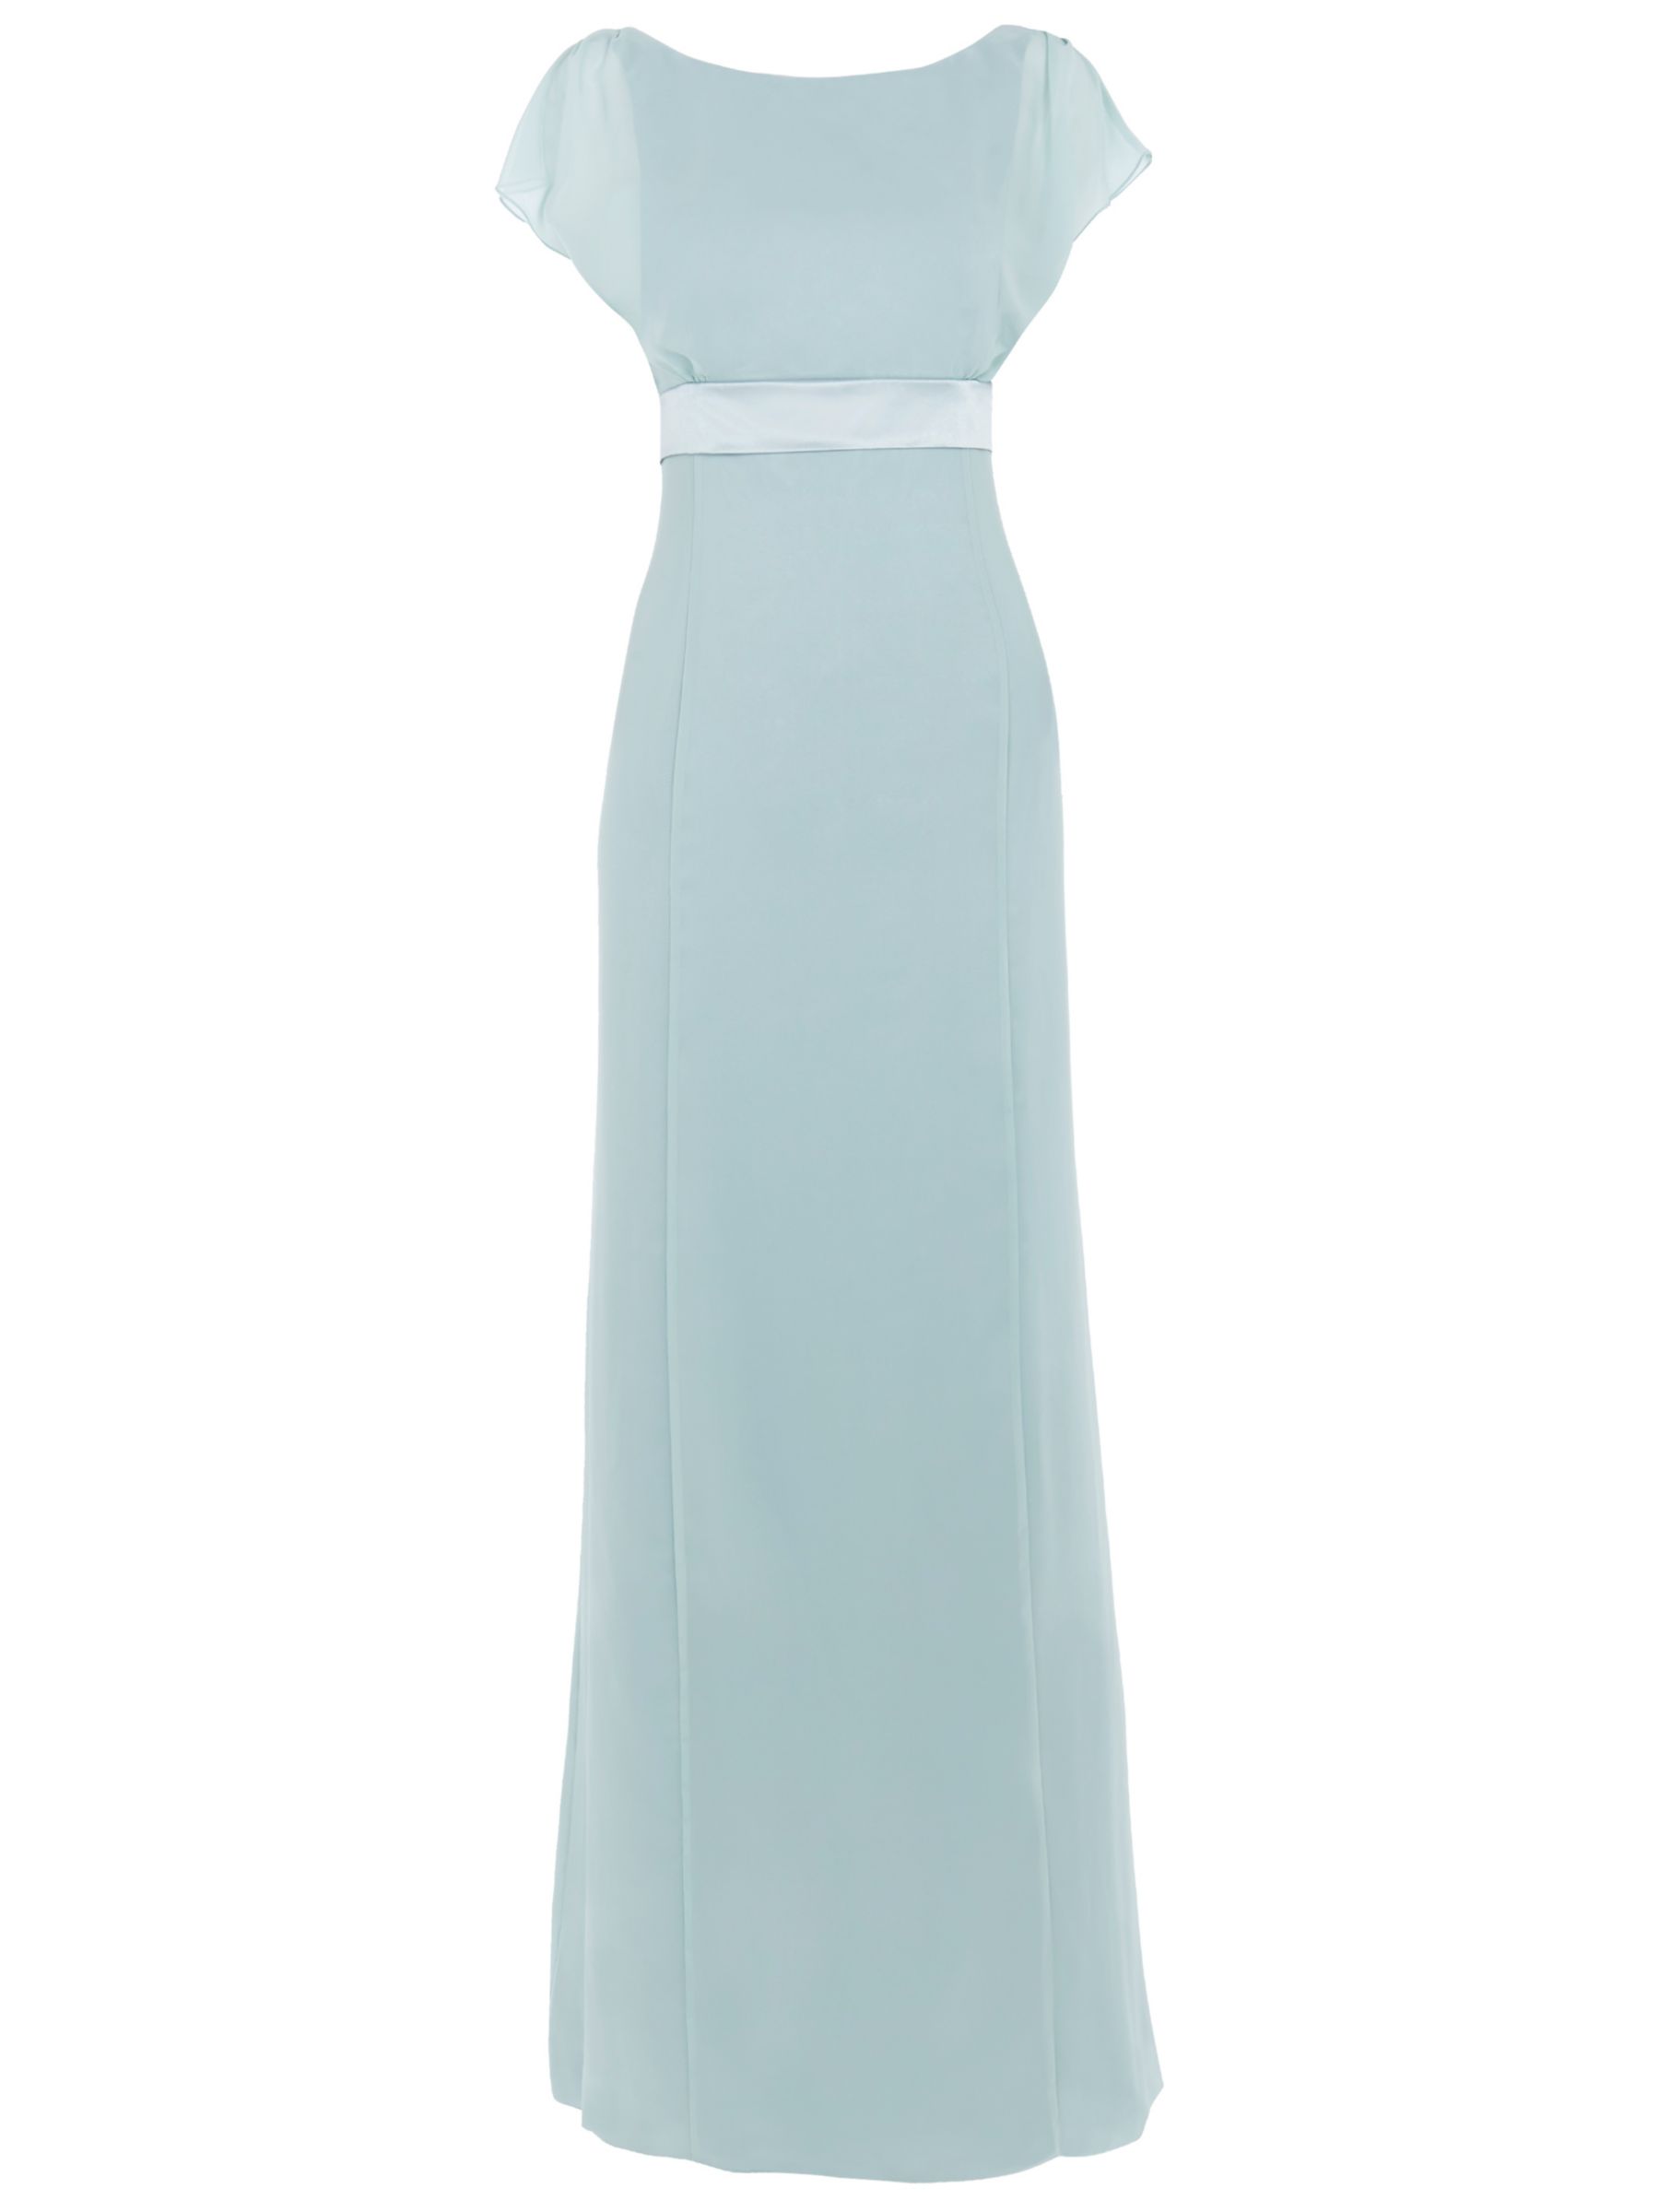 Maids to Measure Isabel Dress, Misty Green, 8